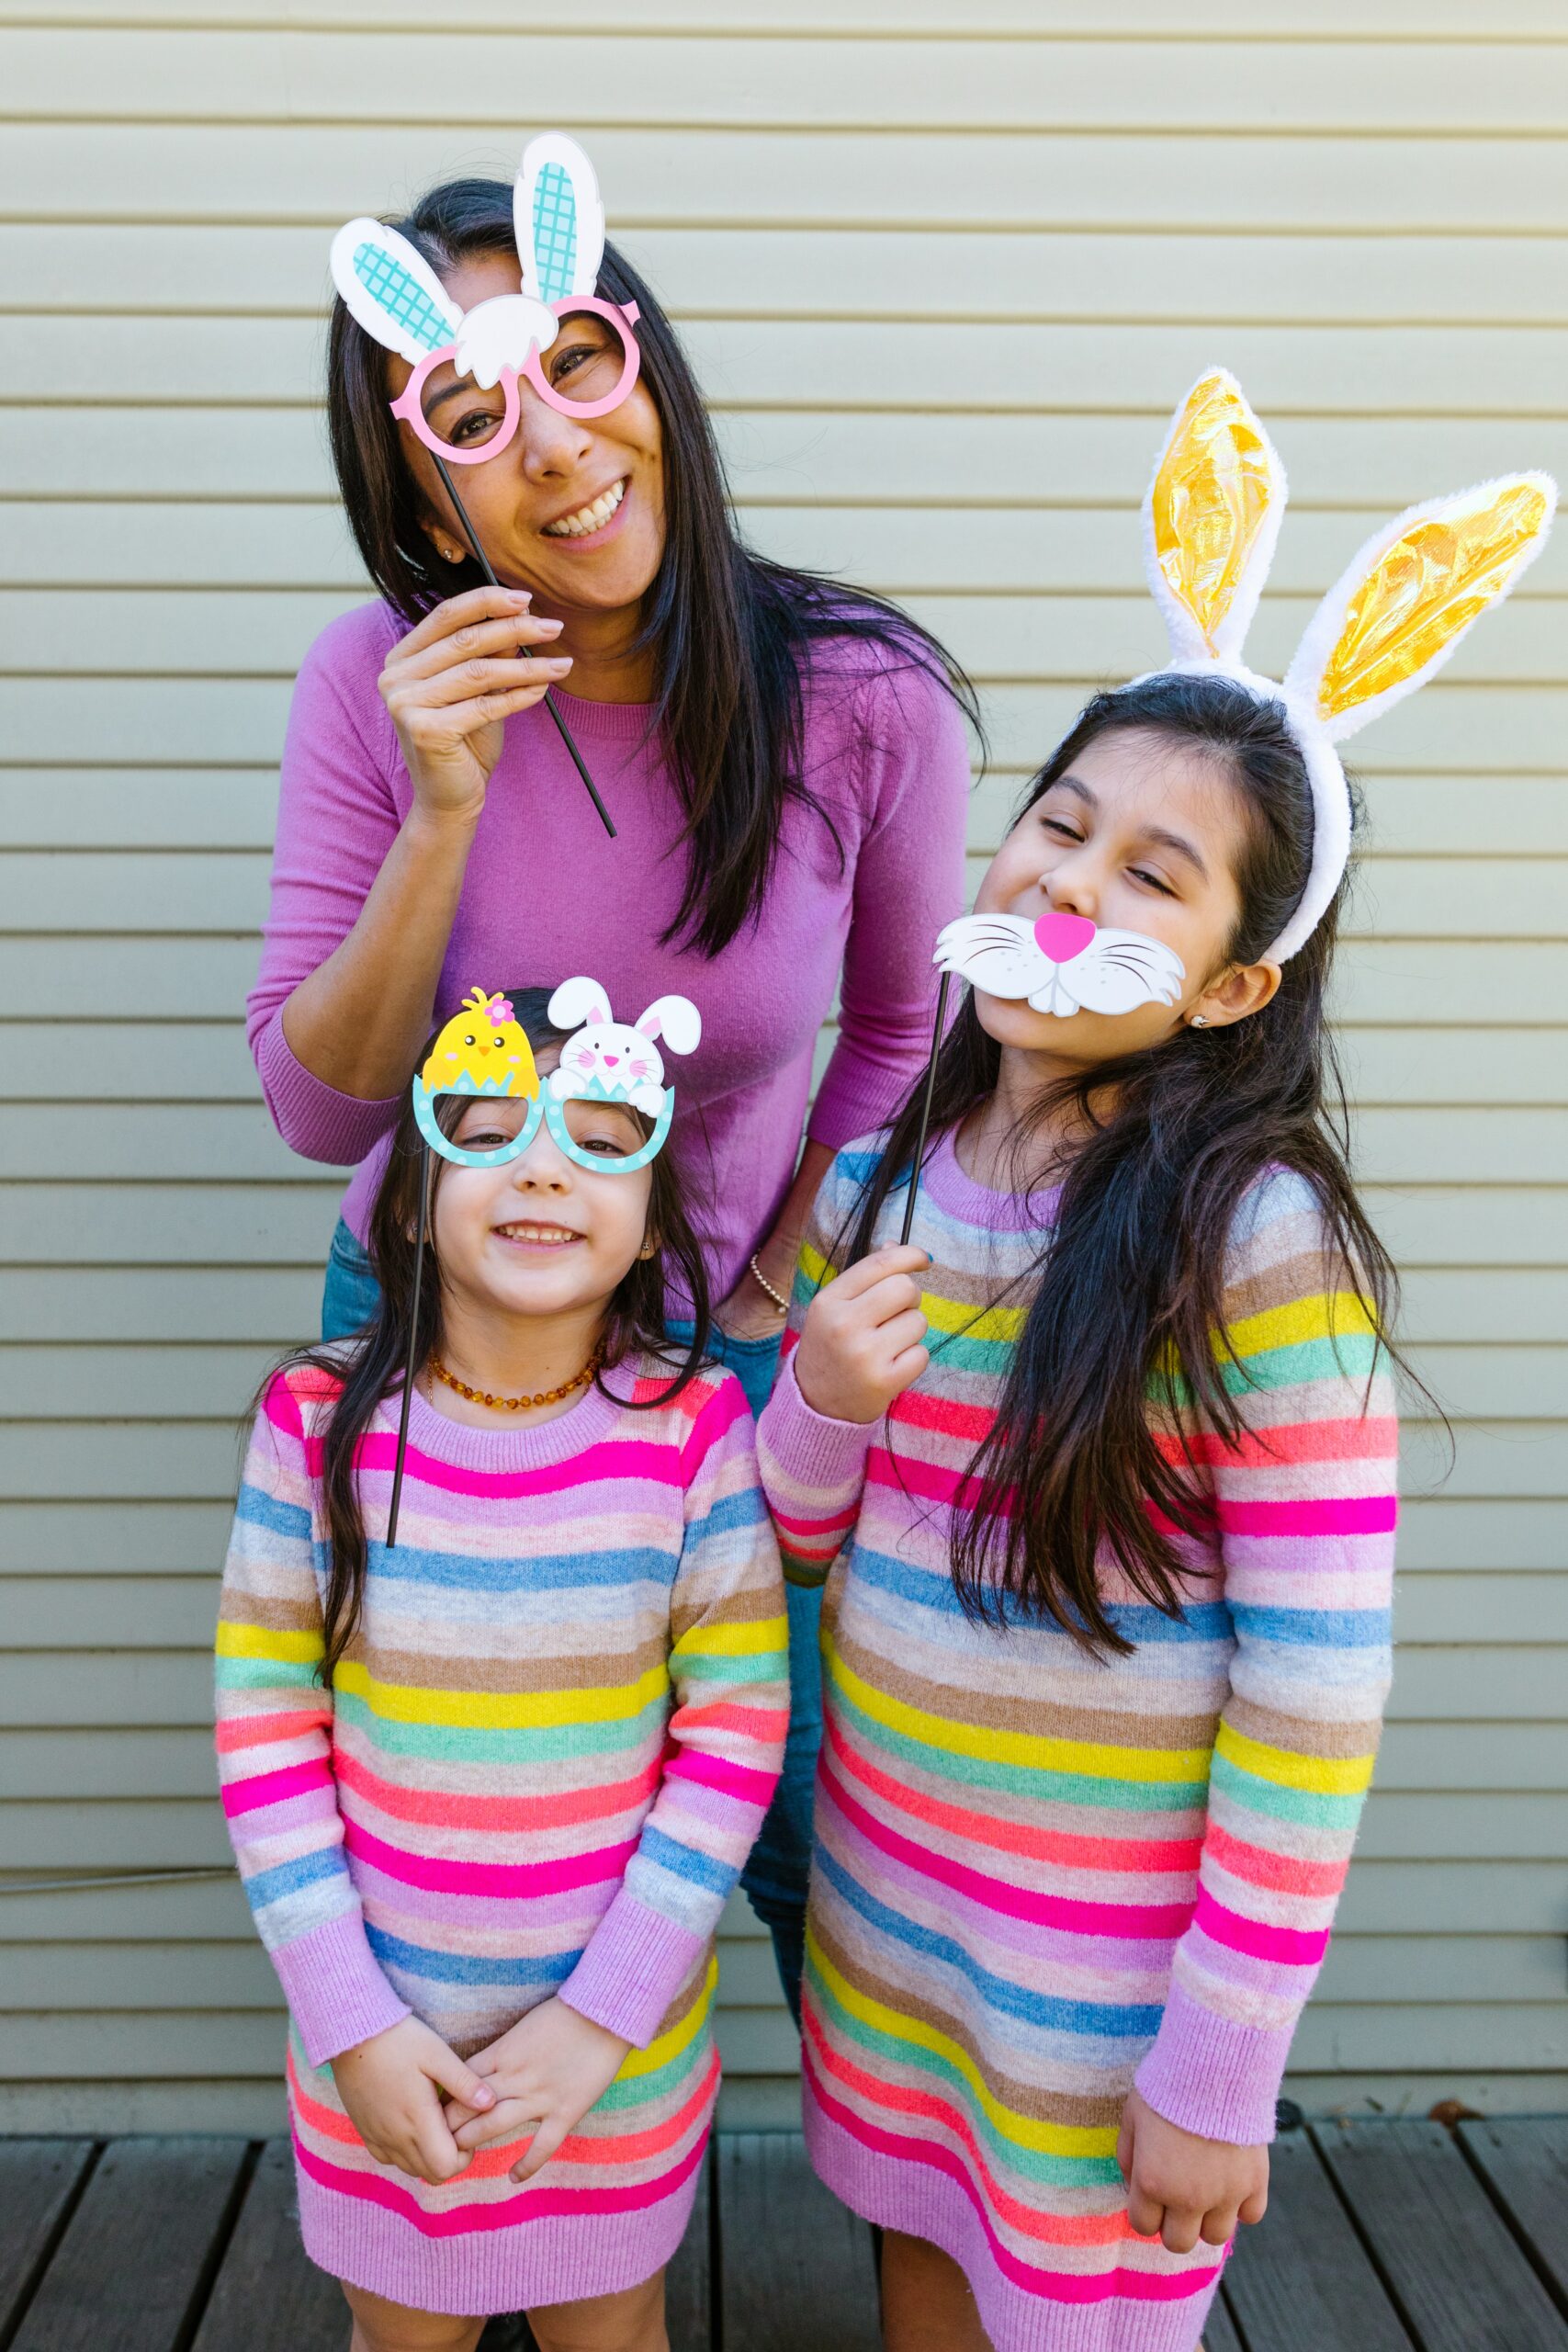 Make This Easter Unforgettable For Your Family With These Fun Ideas